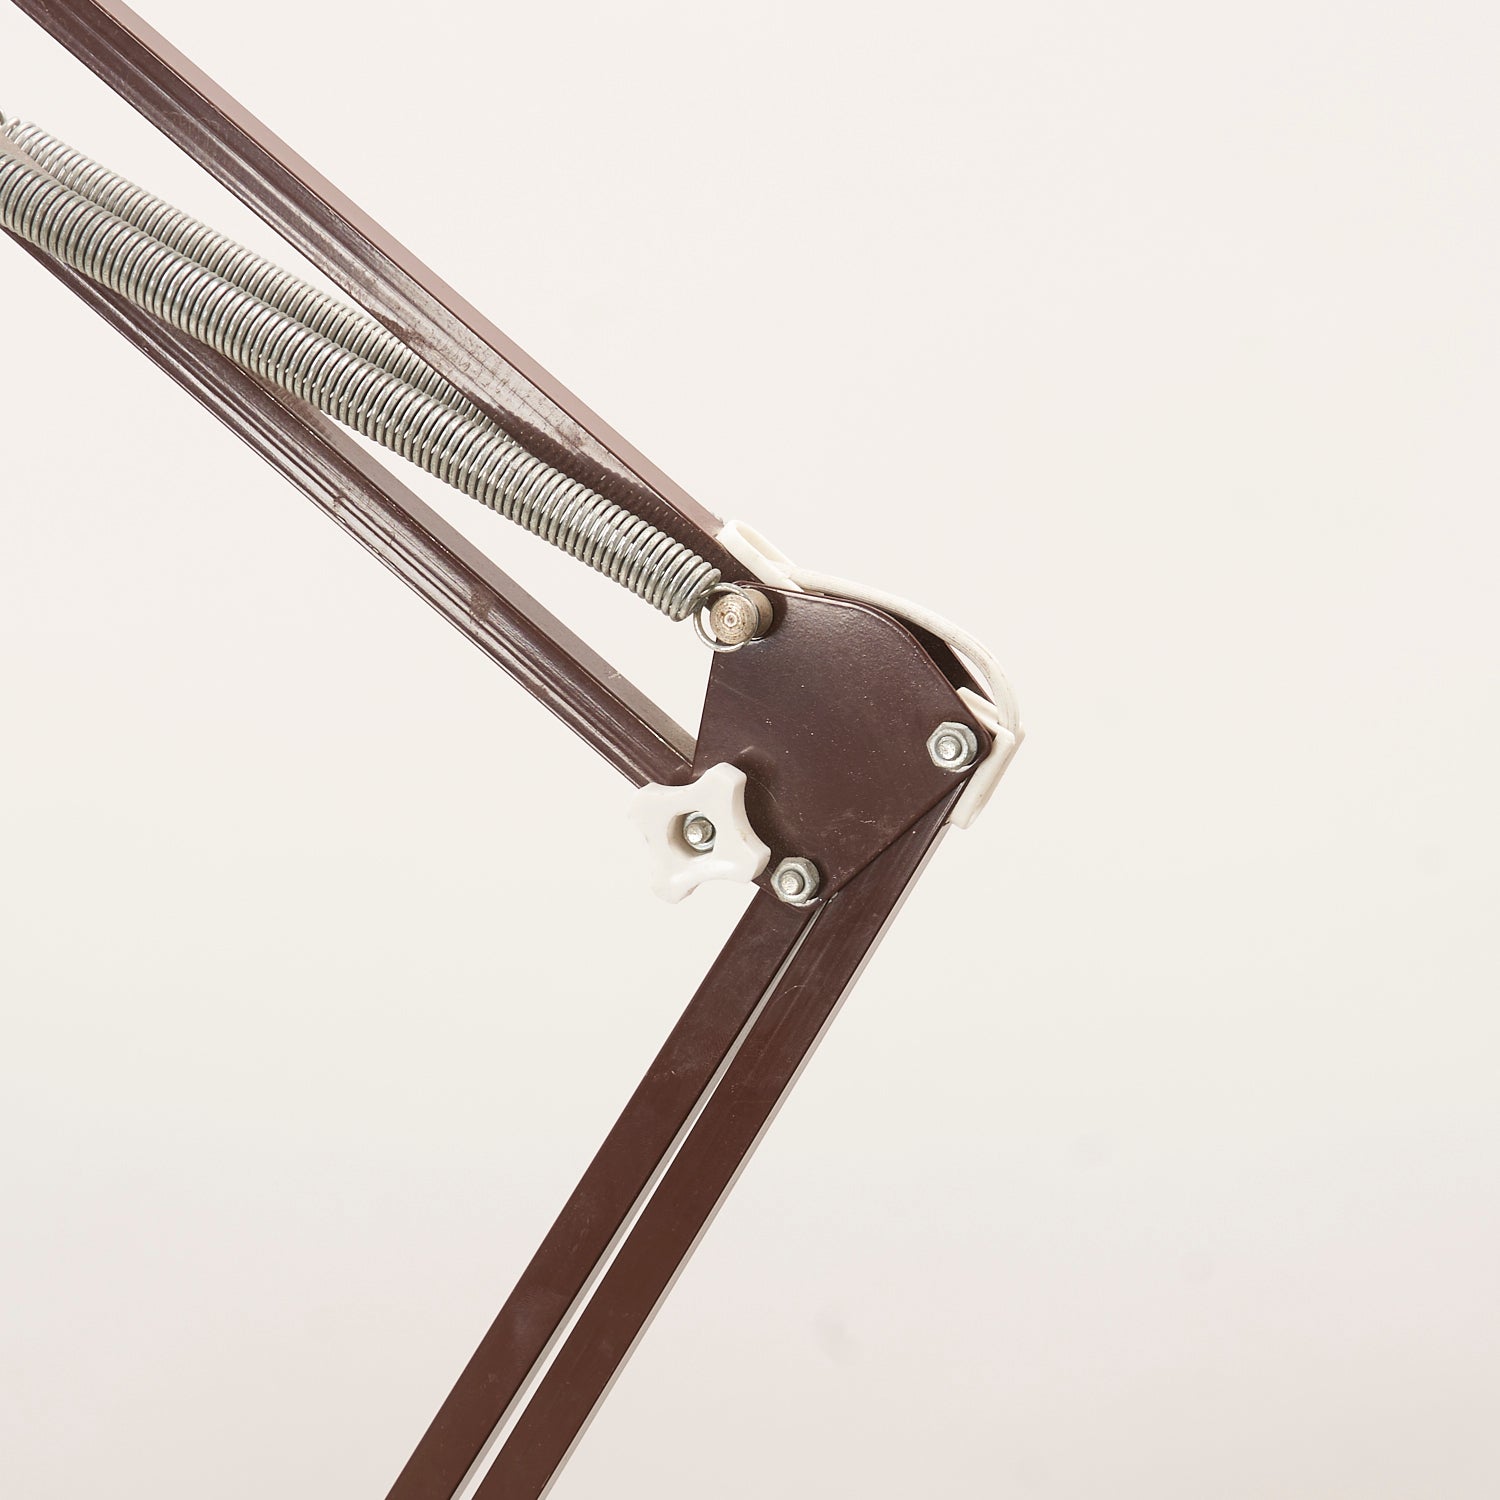 Brown Articulating Clamp Lamp by Lyskaer